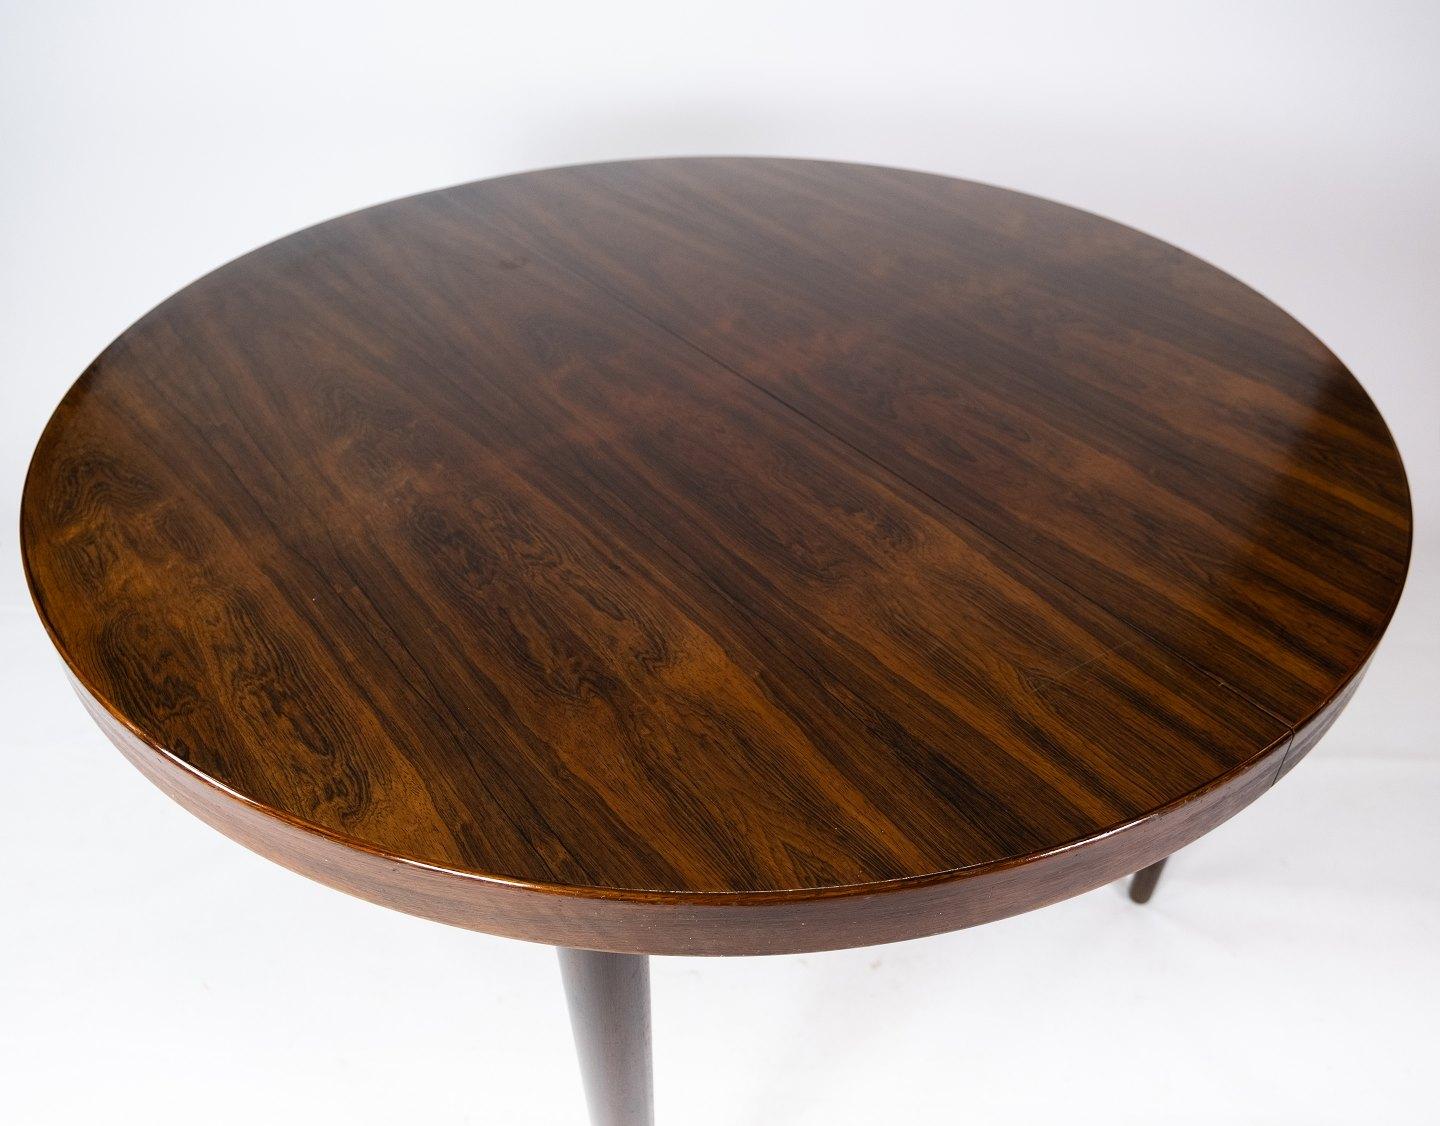 This rosewood dining table was designed by Oman Junior and dates from the 1960s. The table is a brilliant example of Danish furniture design from that time, with its beautiful wood and elegantly designed details.

The rich color and distinctive